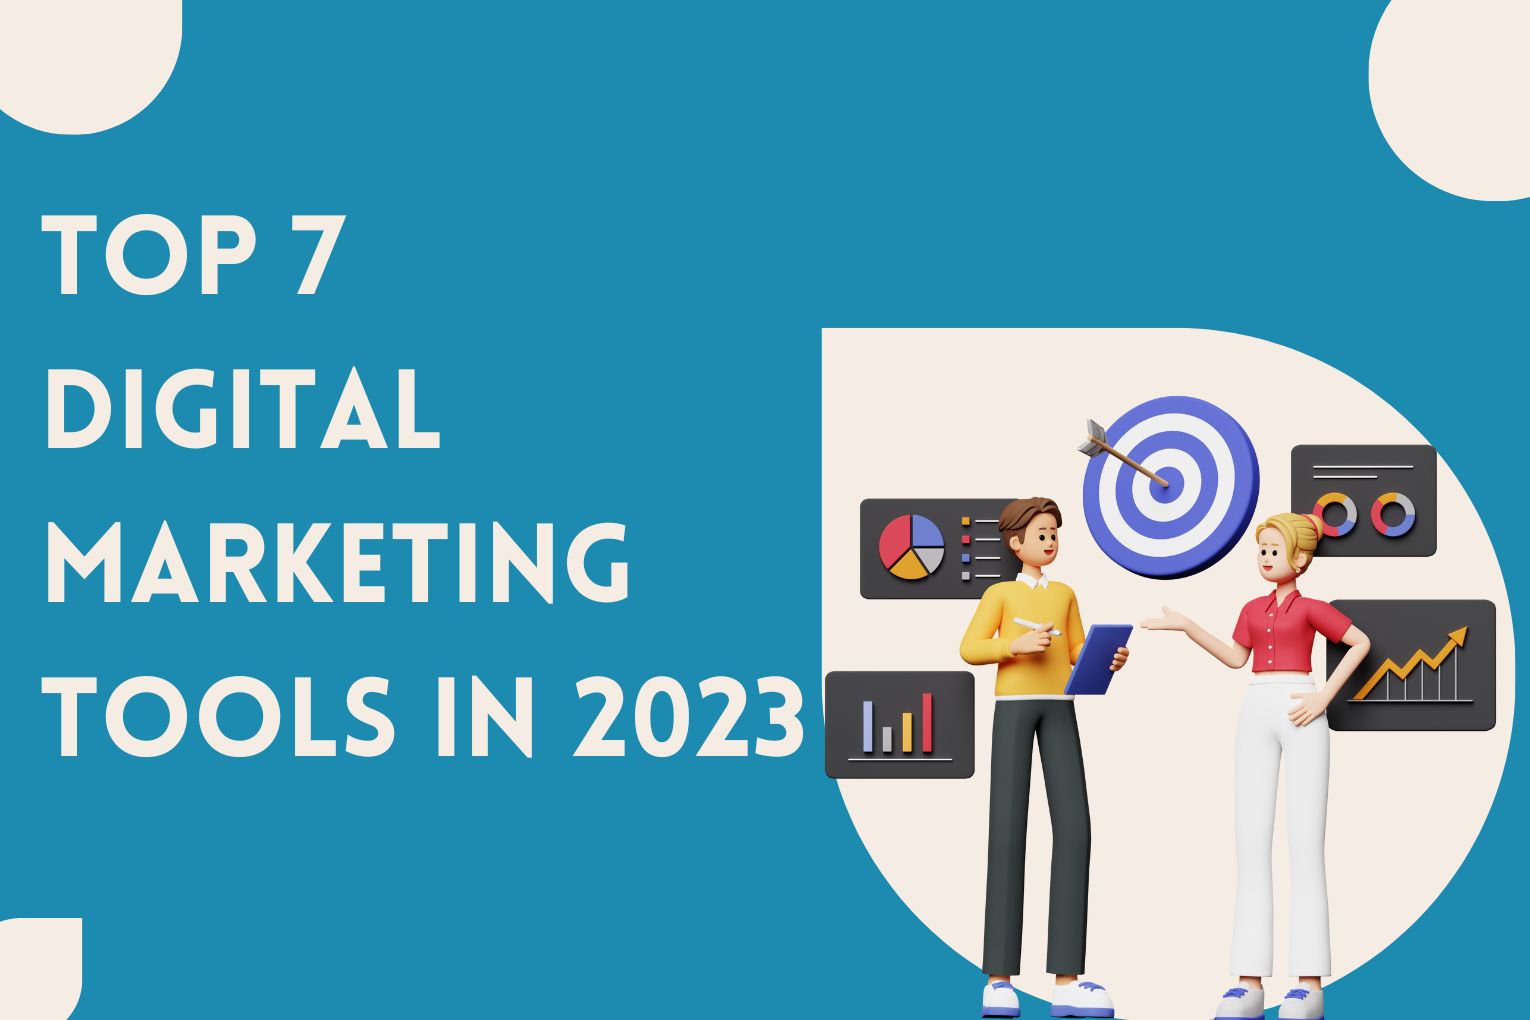 Top 7 Digital Marketing Tools You Should Know In 2023